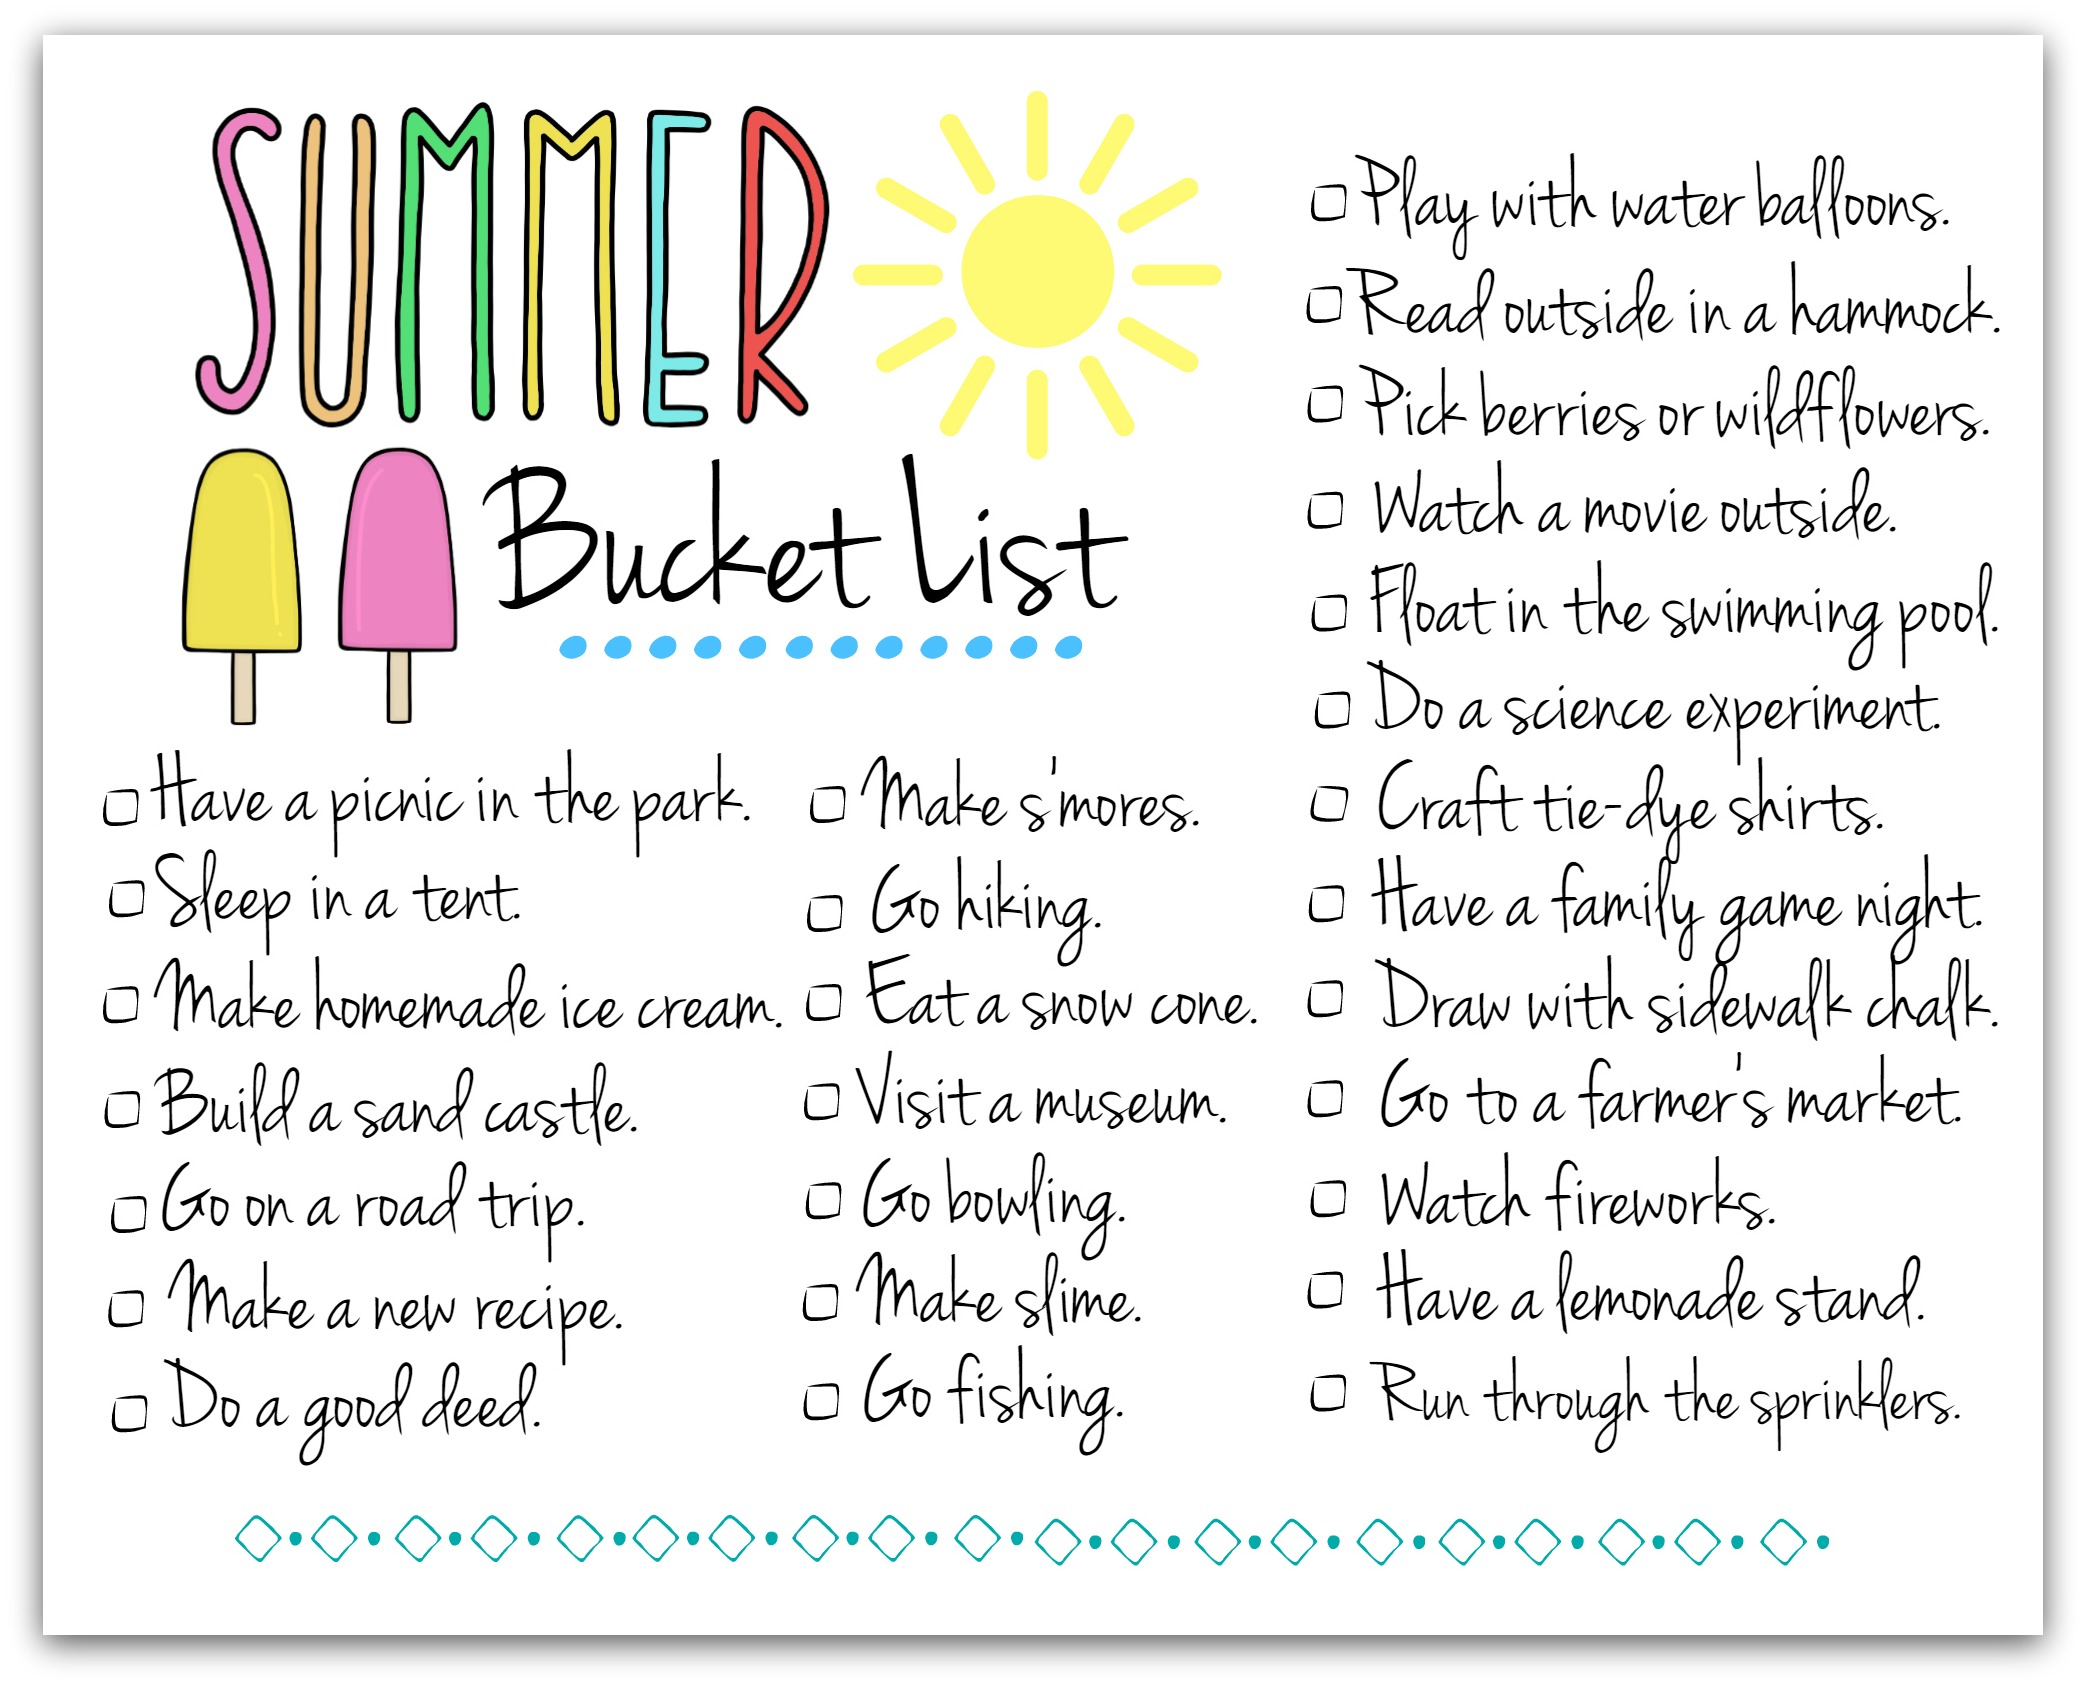 free printable summer bucket list – filled out with our ideas